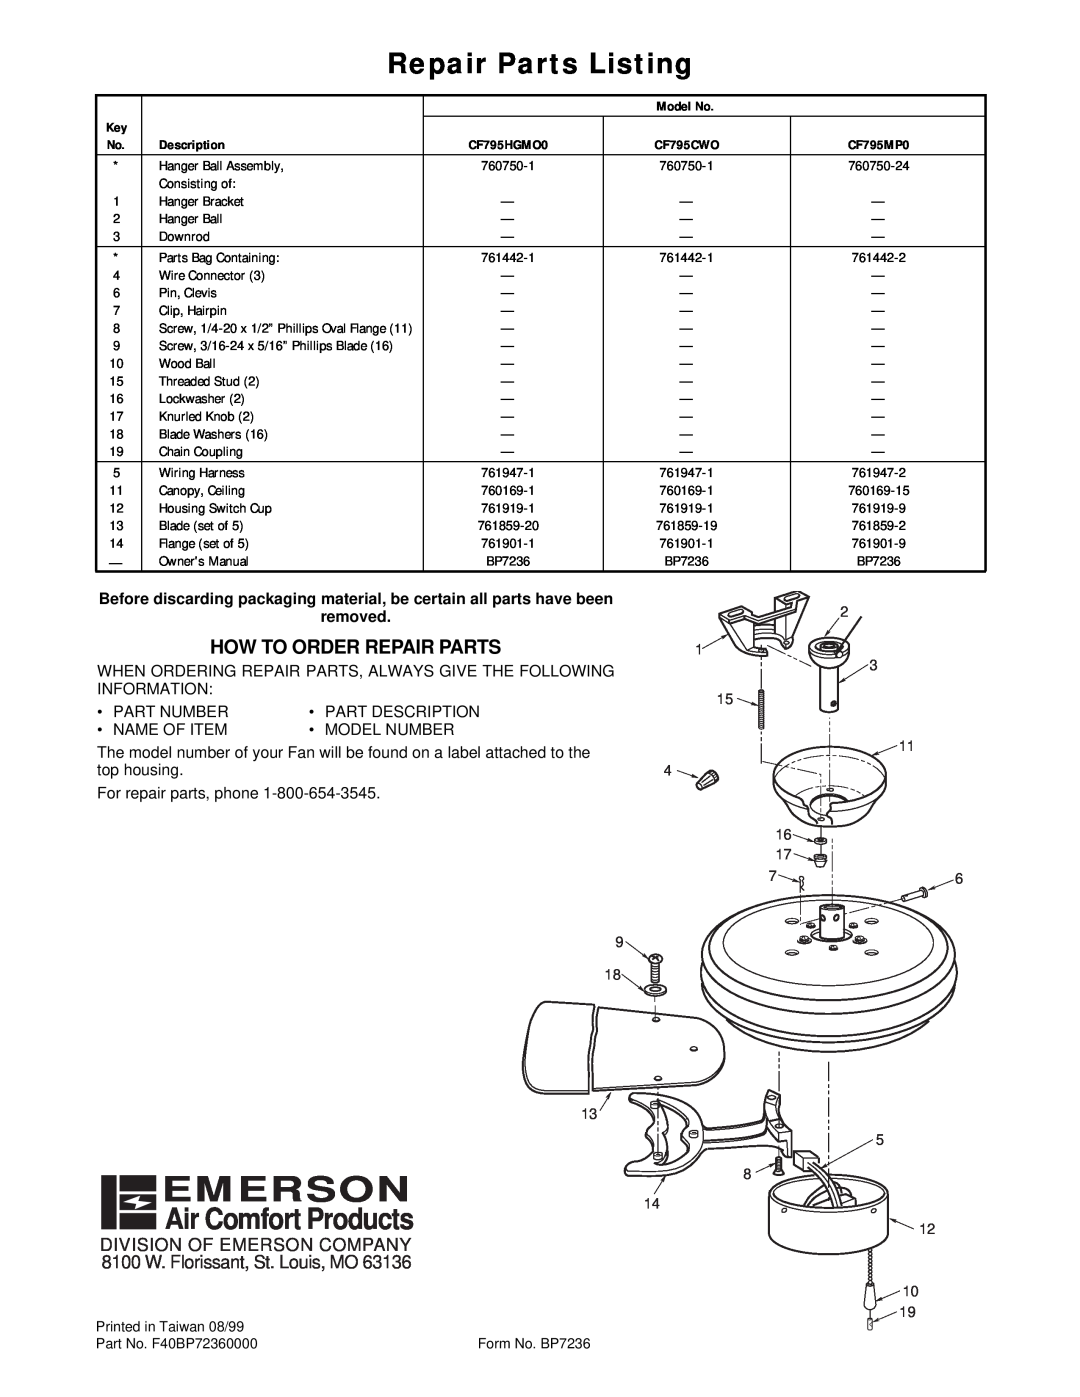 Emerson CF796MP0, CF796CW0, CF796HGMO0 Repair Parts Listing, Emerson, Air Comfort Products, How To Order Repair Parts 